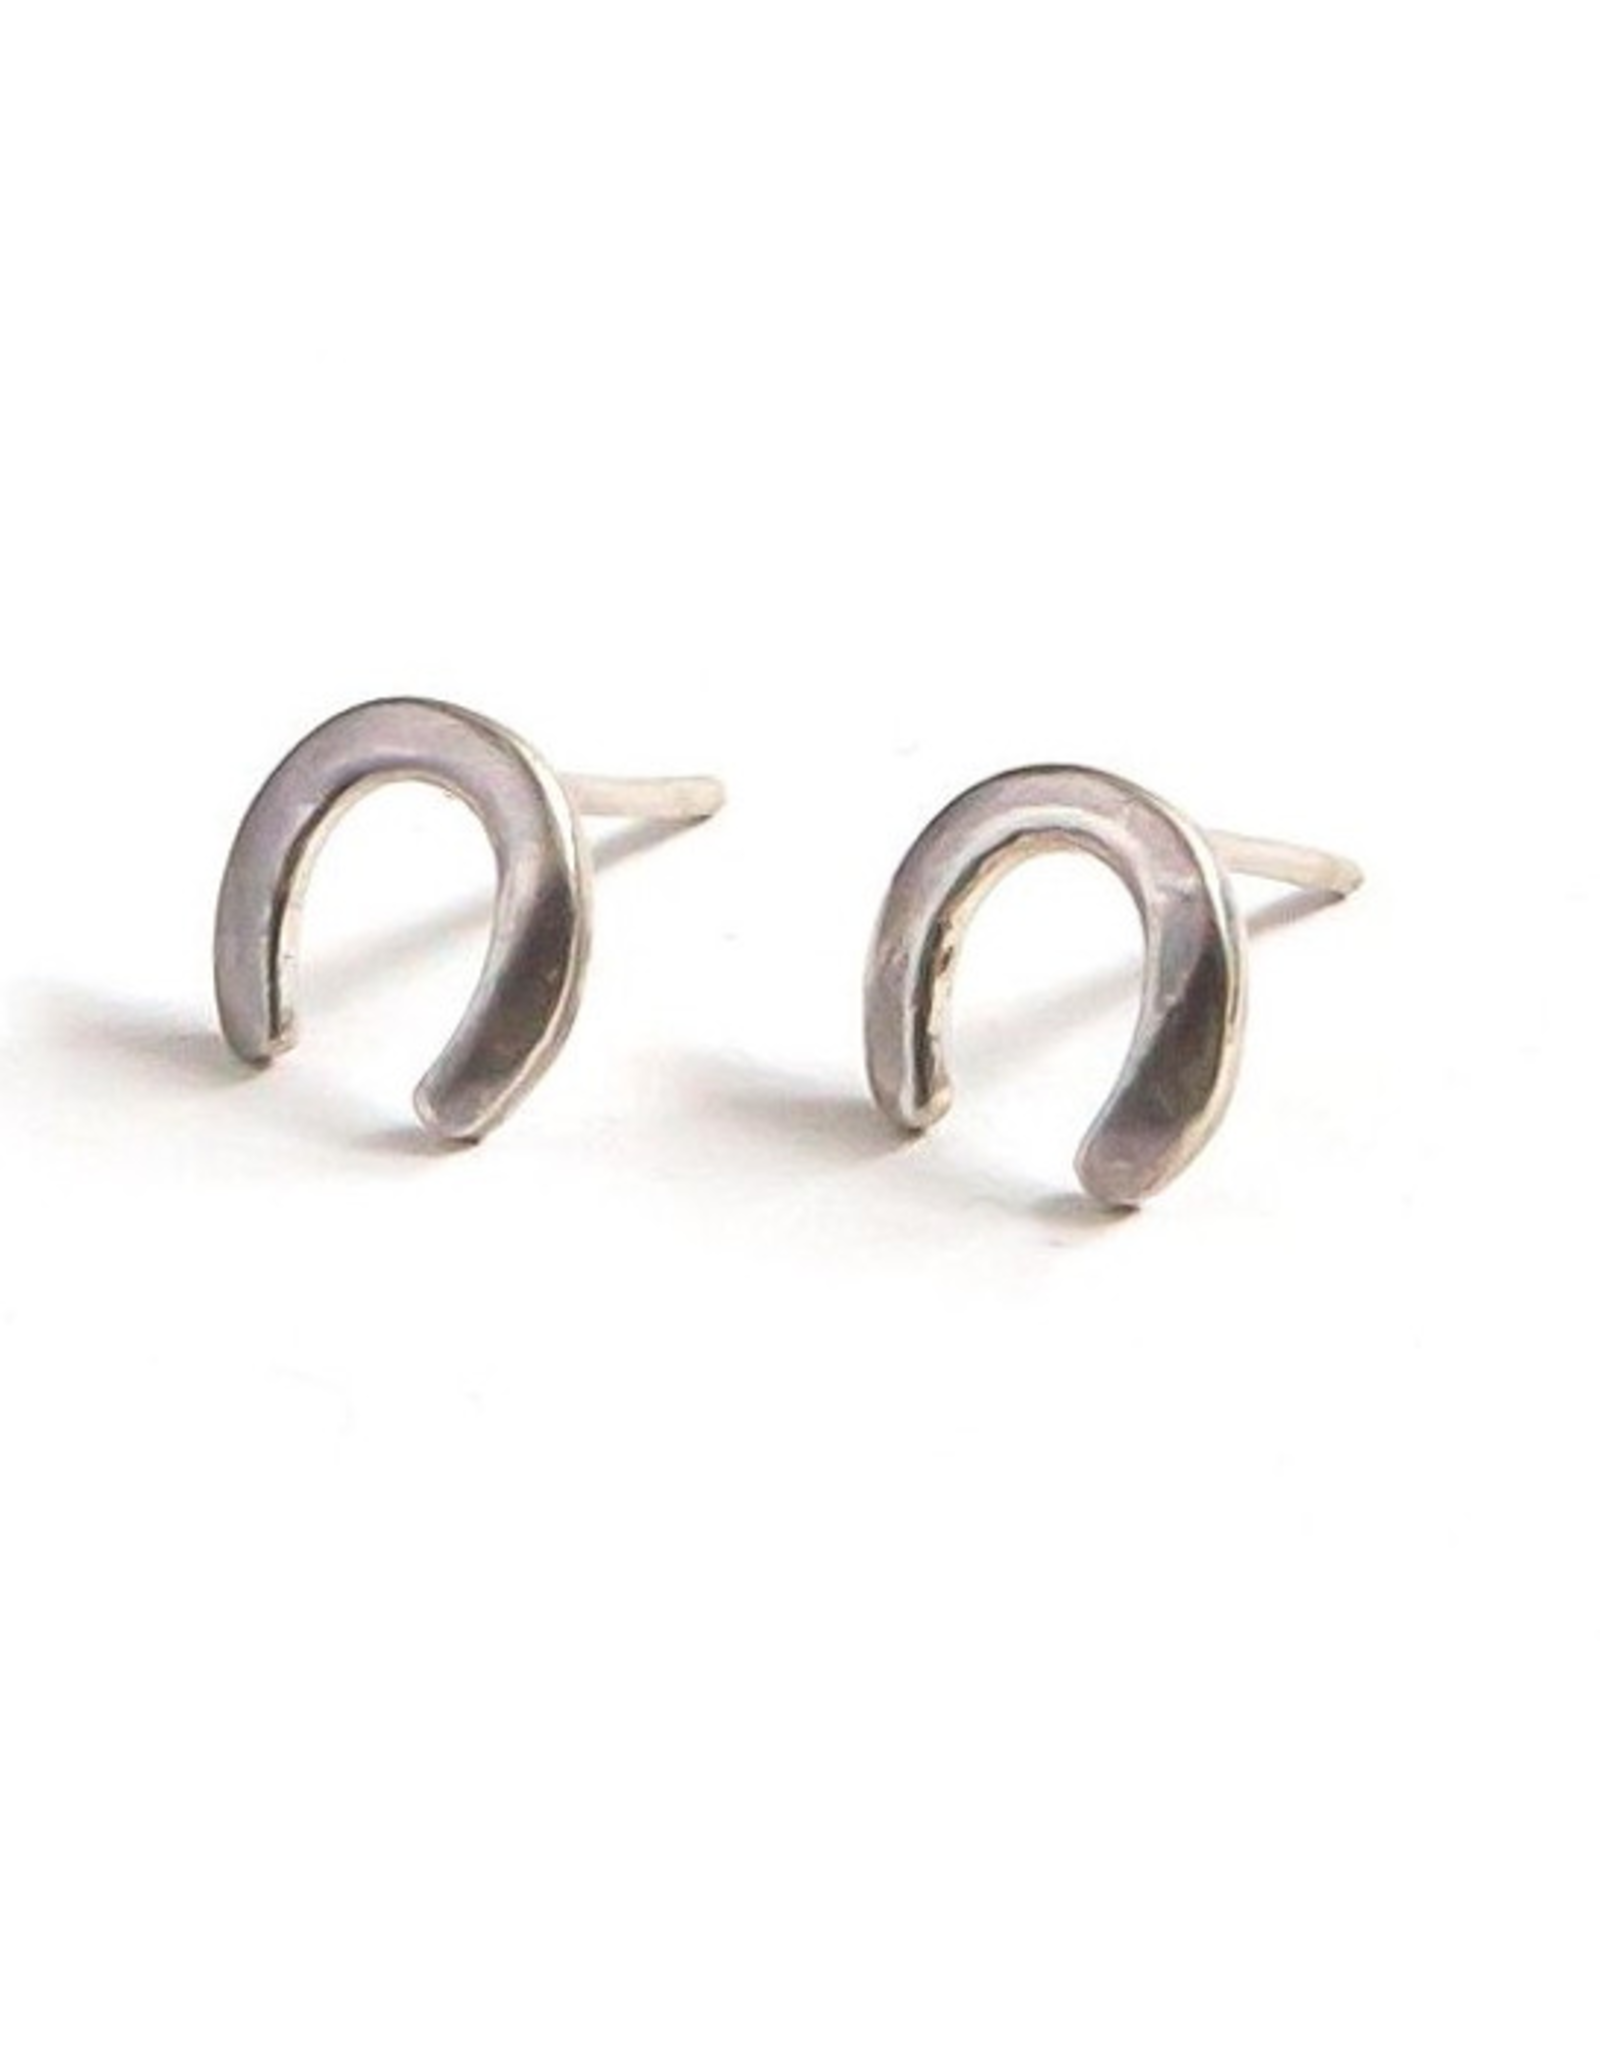 India Waning Crescent Sterling Silver Stud Earrings, India